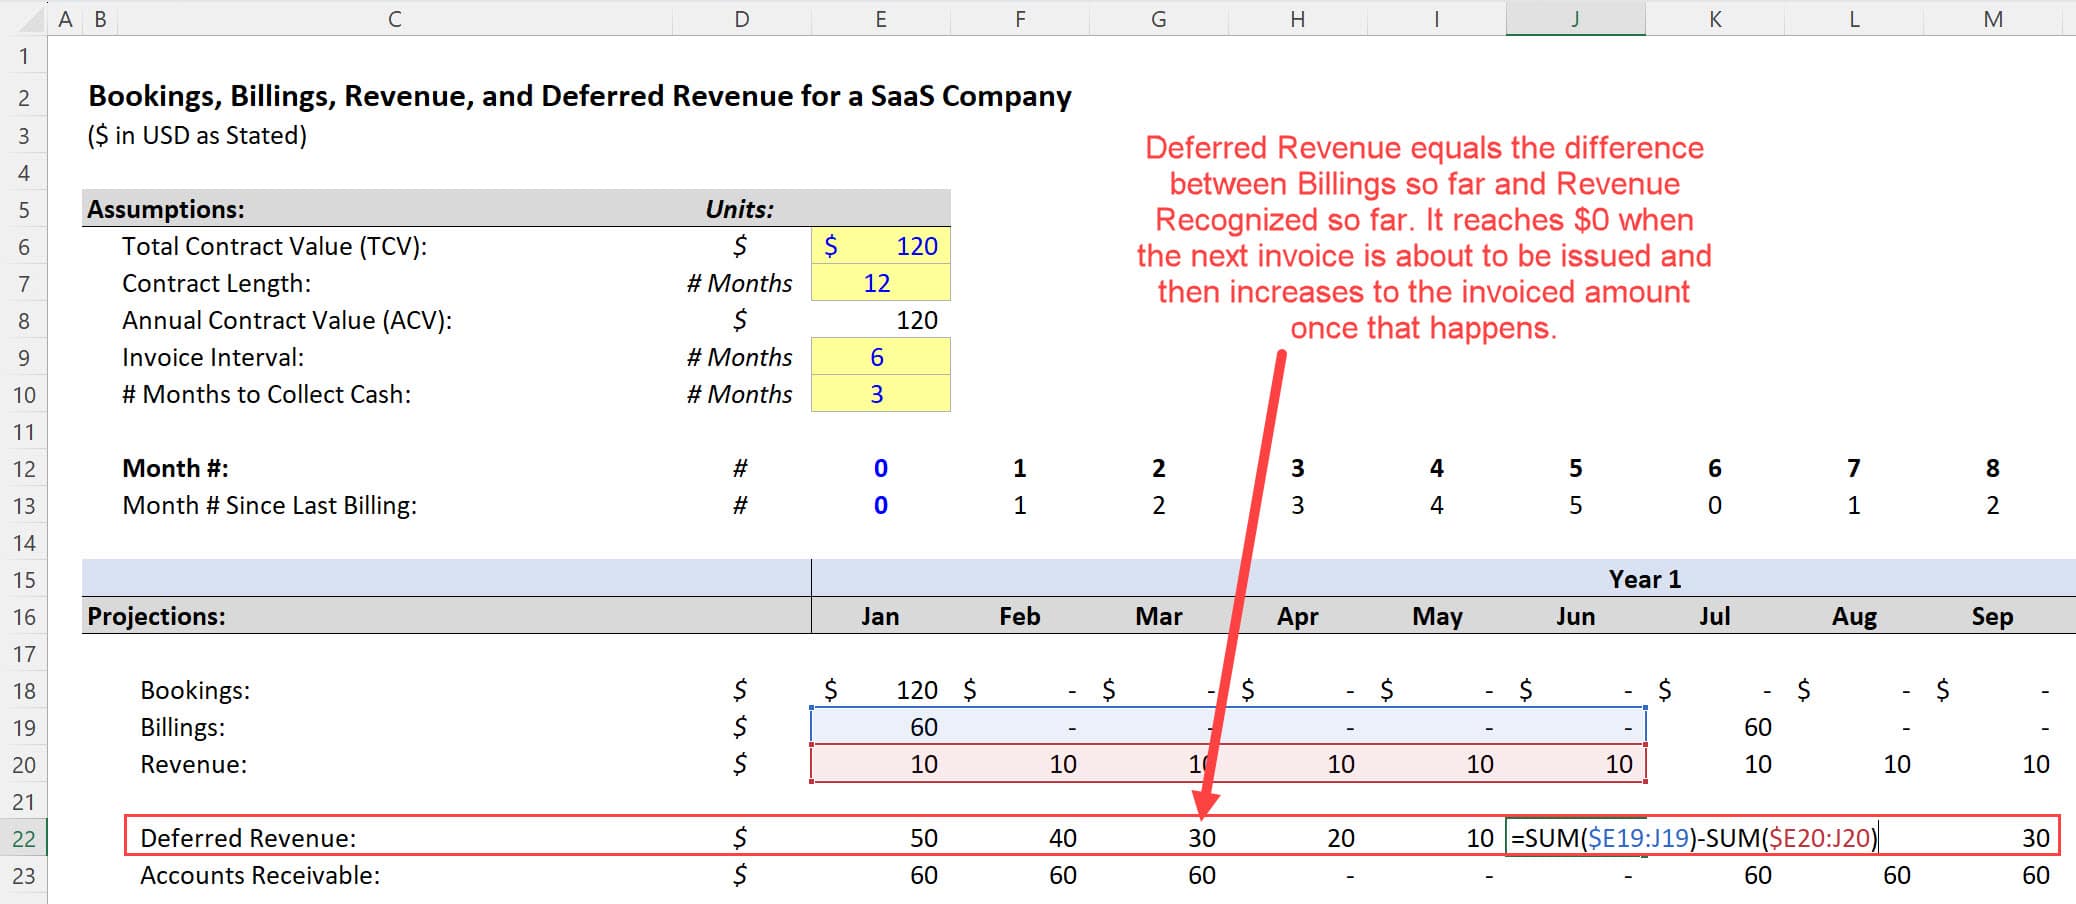 SaaS Accounting: Deferred Revenue Changes